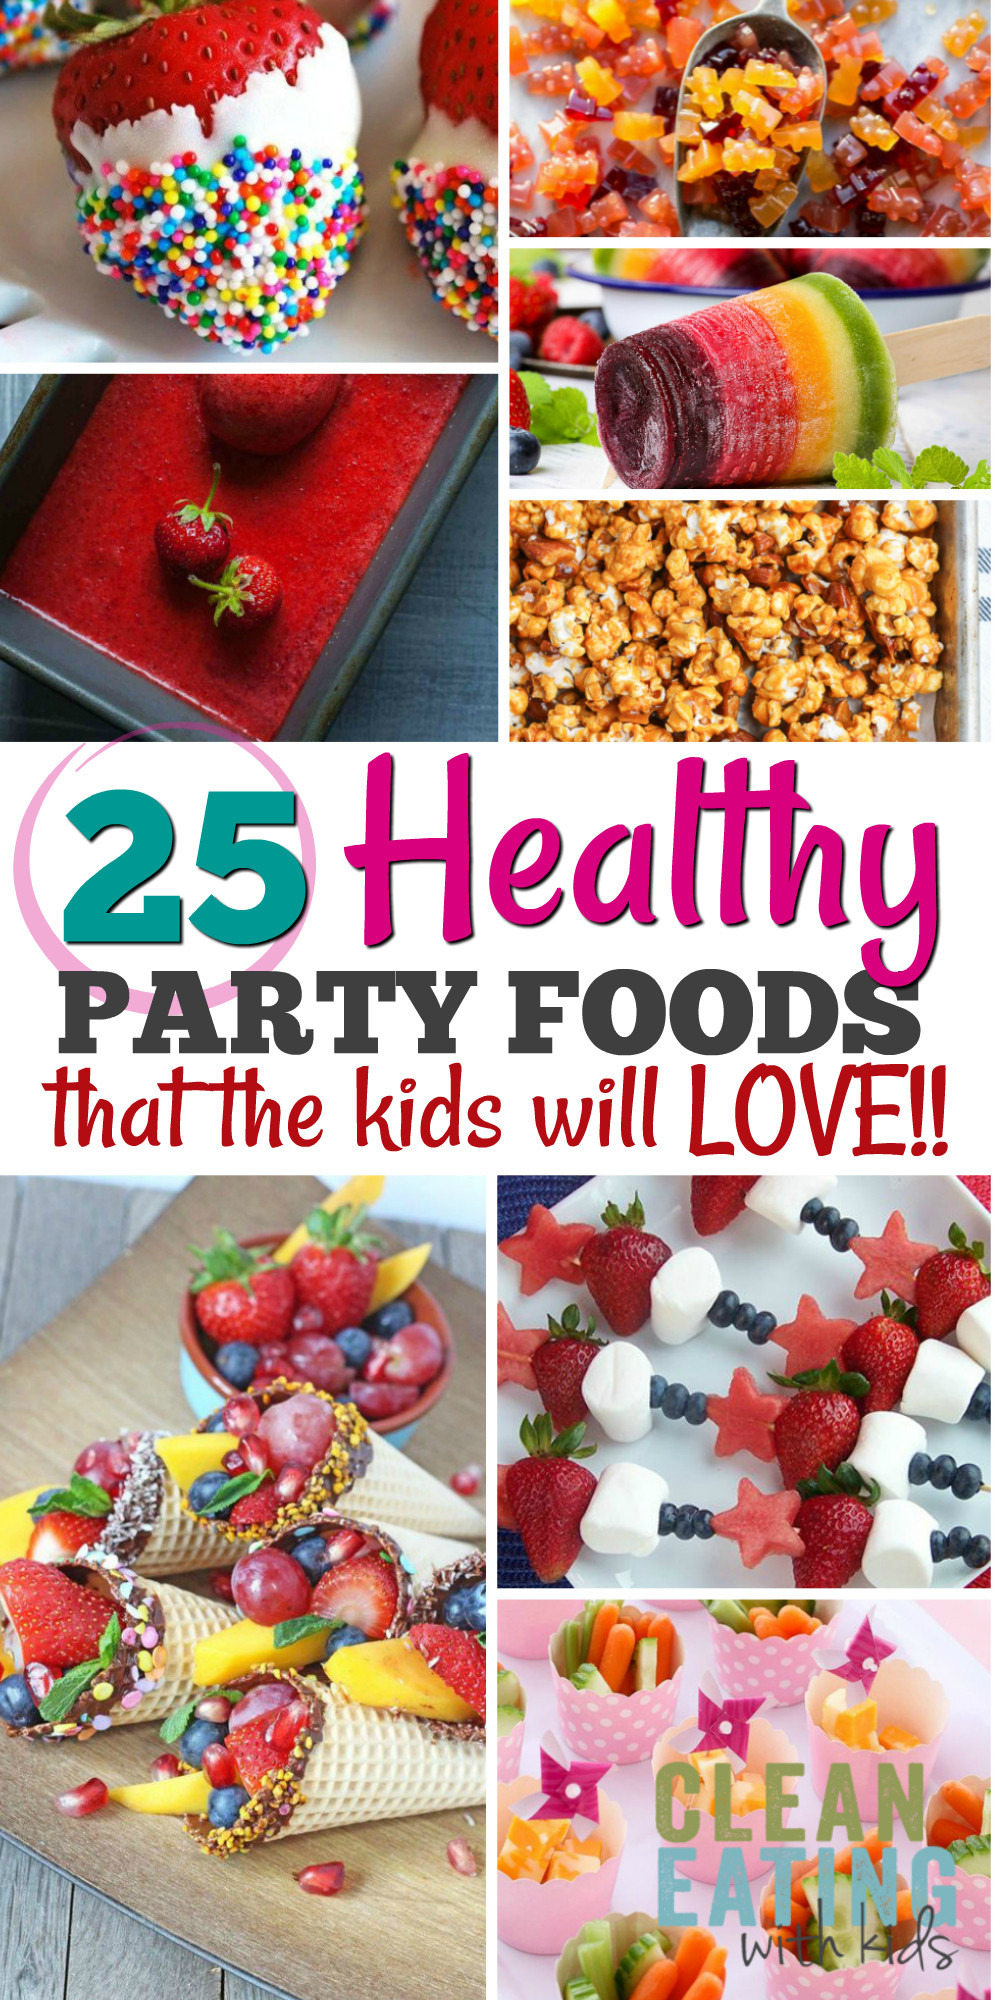 Kids Birthday Party Food Idea
 25 Healthy Birthday Party Food Ideas Clean Eating with kids